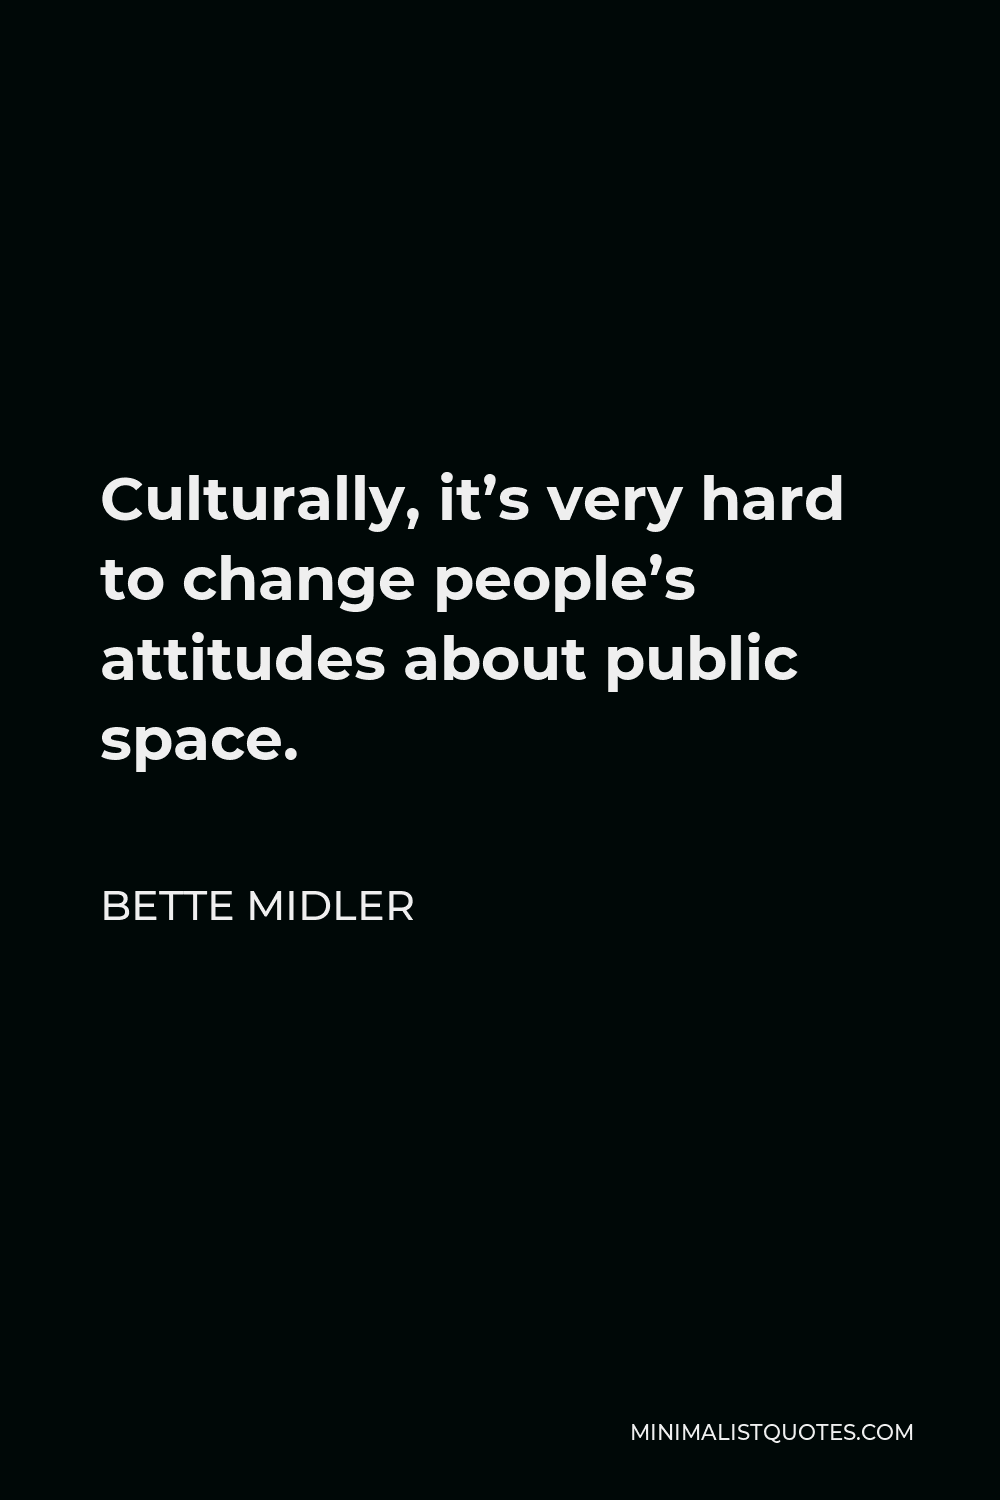 Bette Midler Quote - Culturally, it’s very hard to change people’s attitudes about public space.